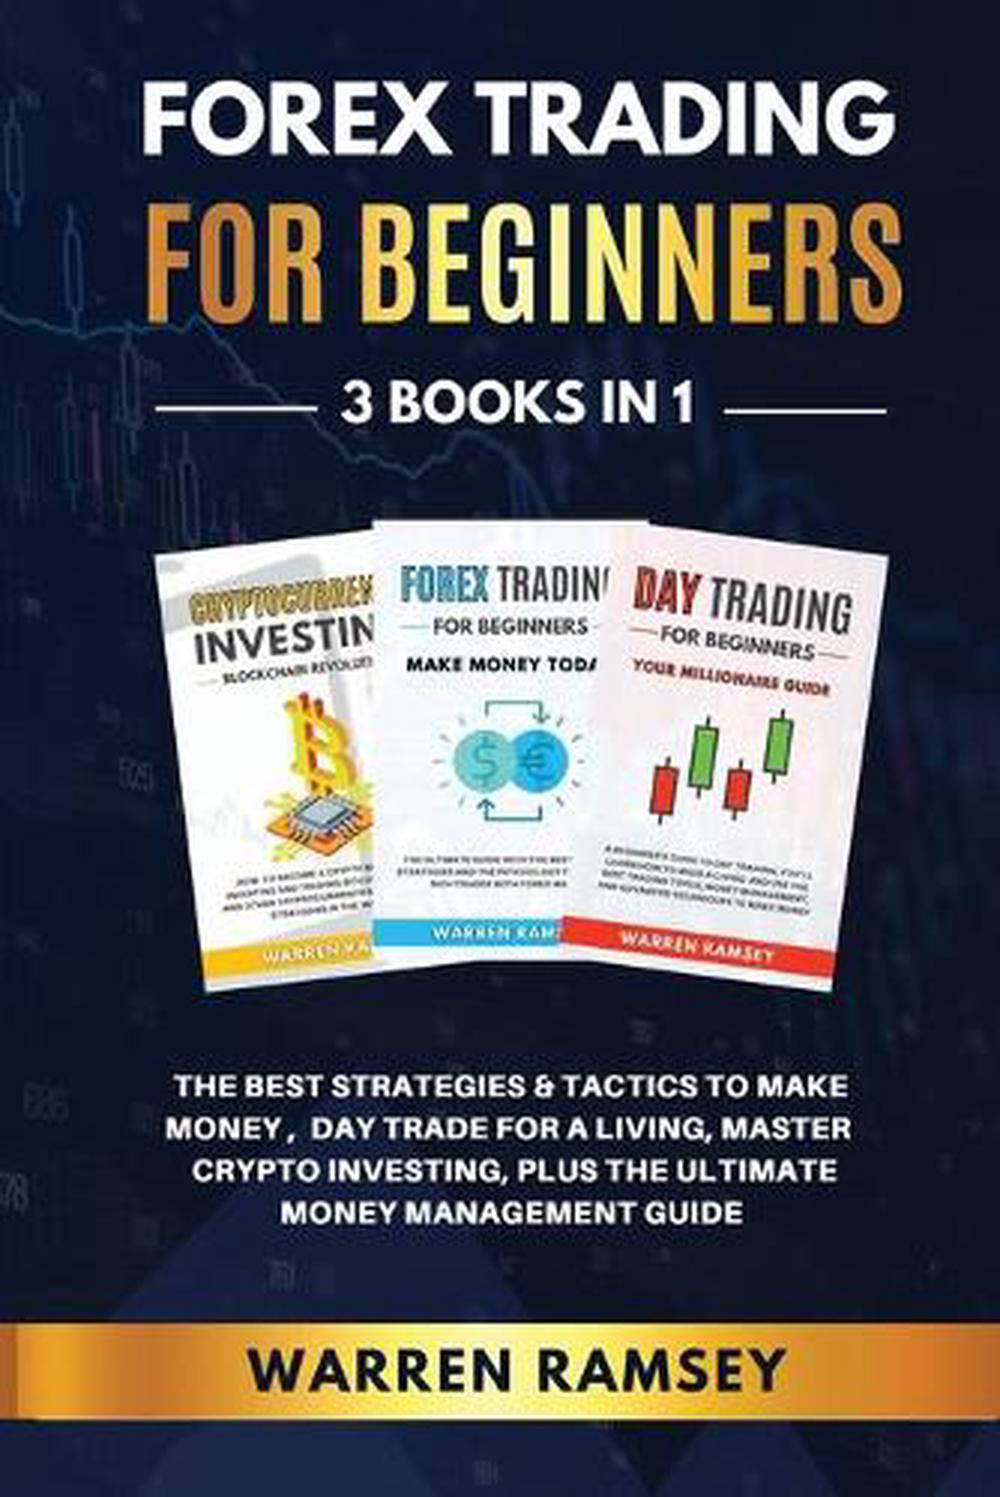 Forex Trading for Beginners 3 Books in 1 the Best Strategies & Tactis